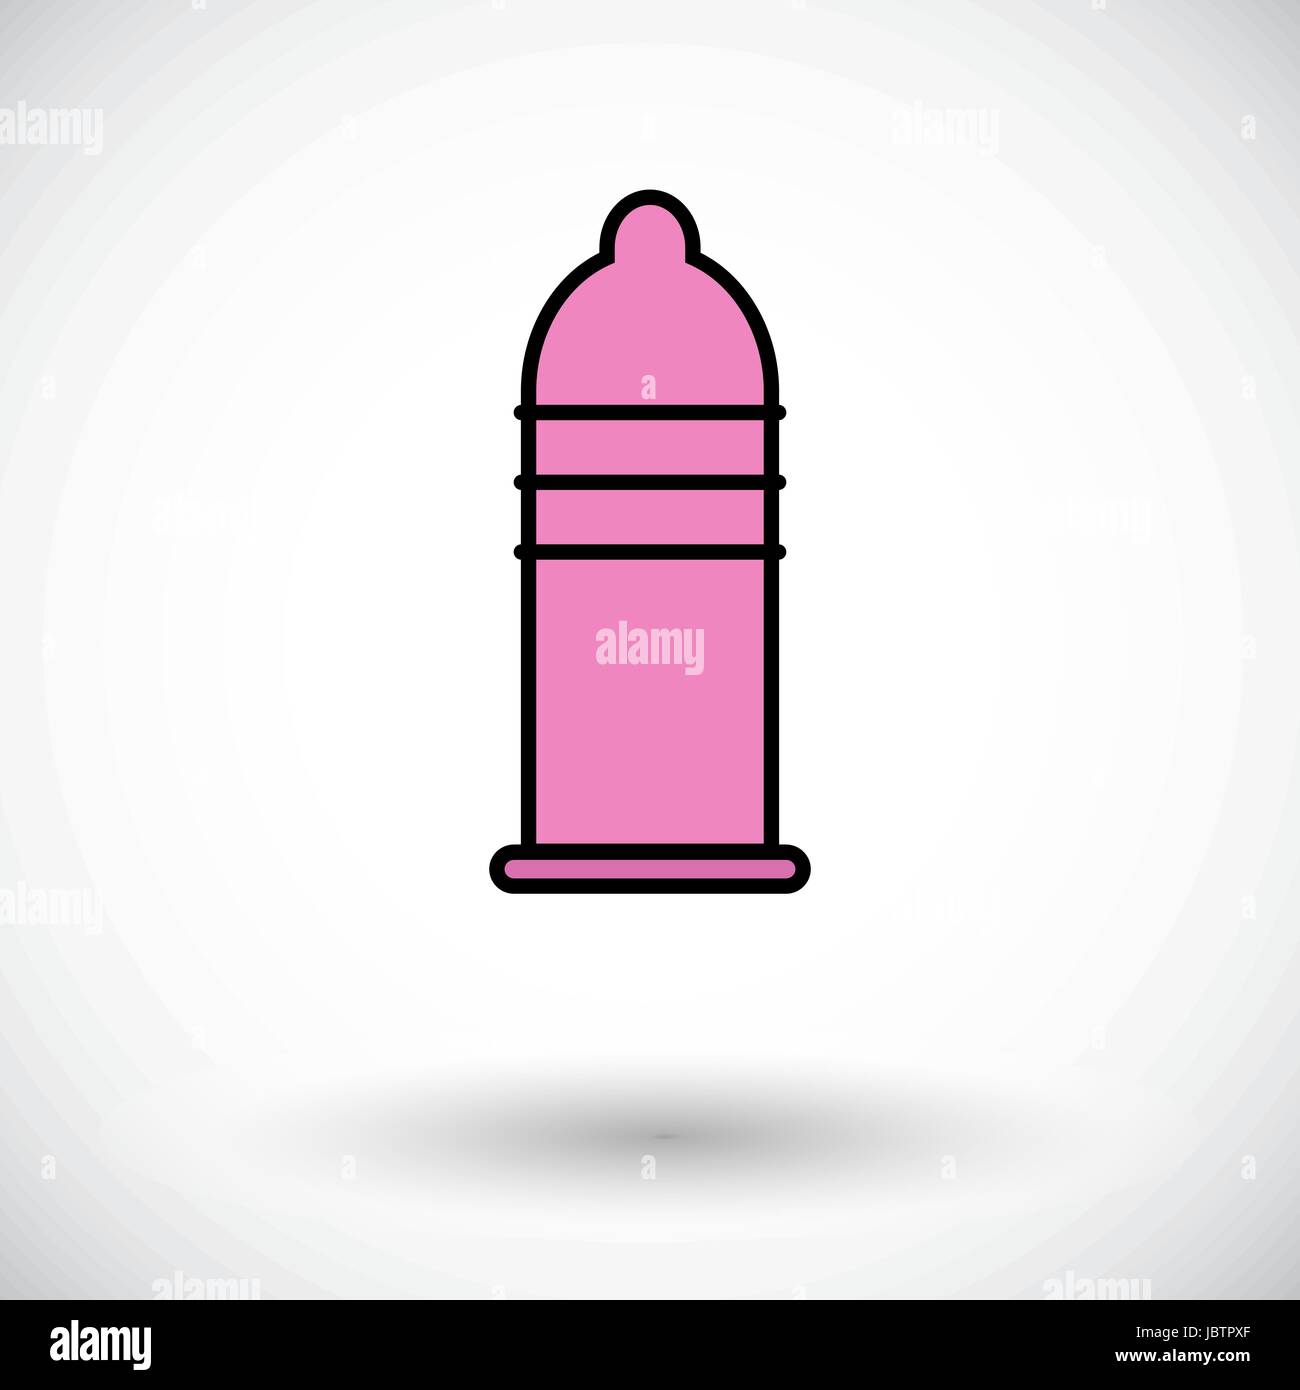 Condom icon. Flat vector related icon for web and mobile applications. It can be used as - logo, pictogram, icon, infographic element. Vector Illustra Stock Vector